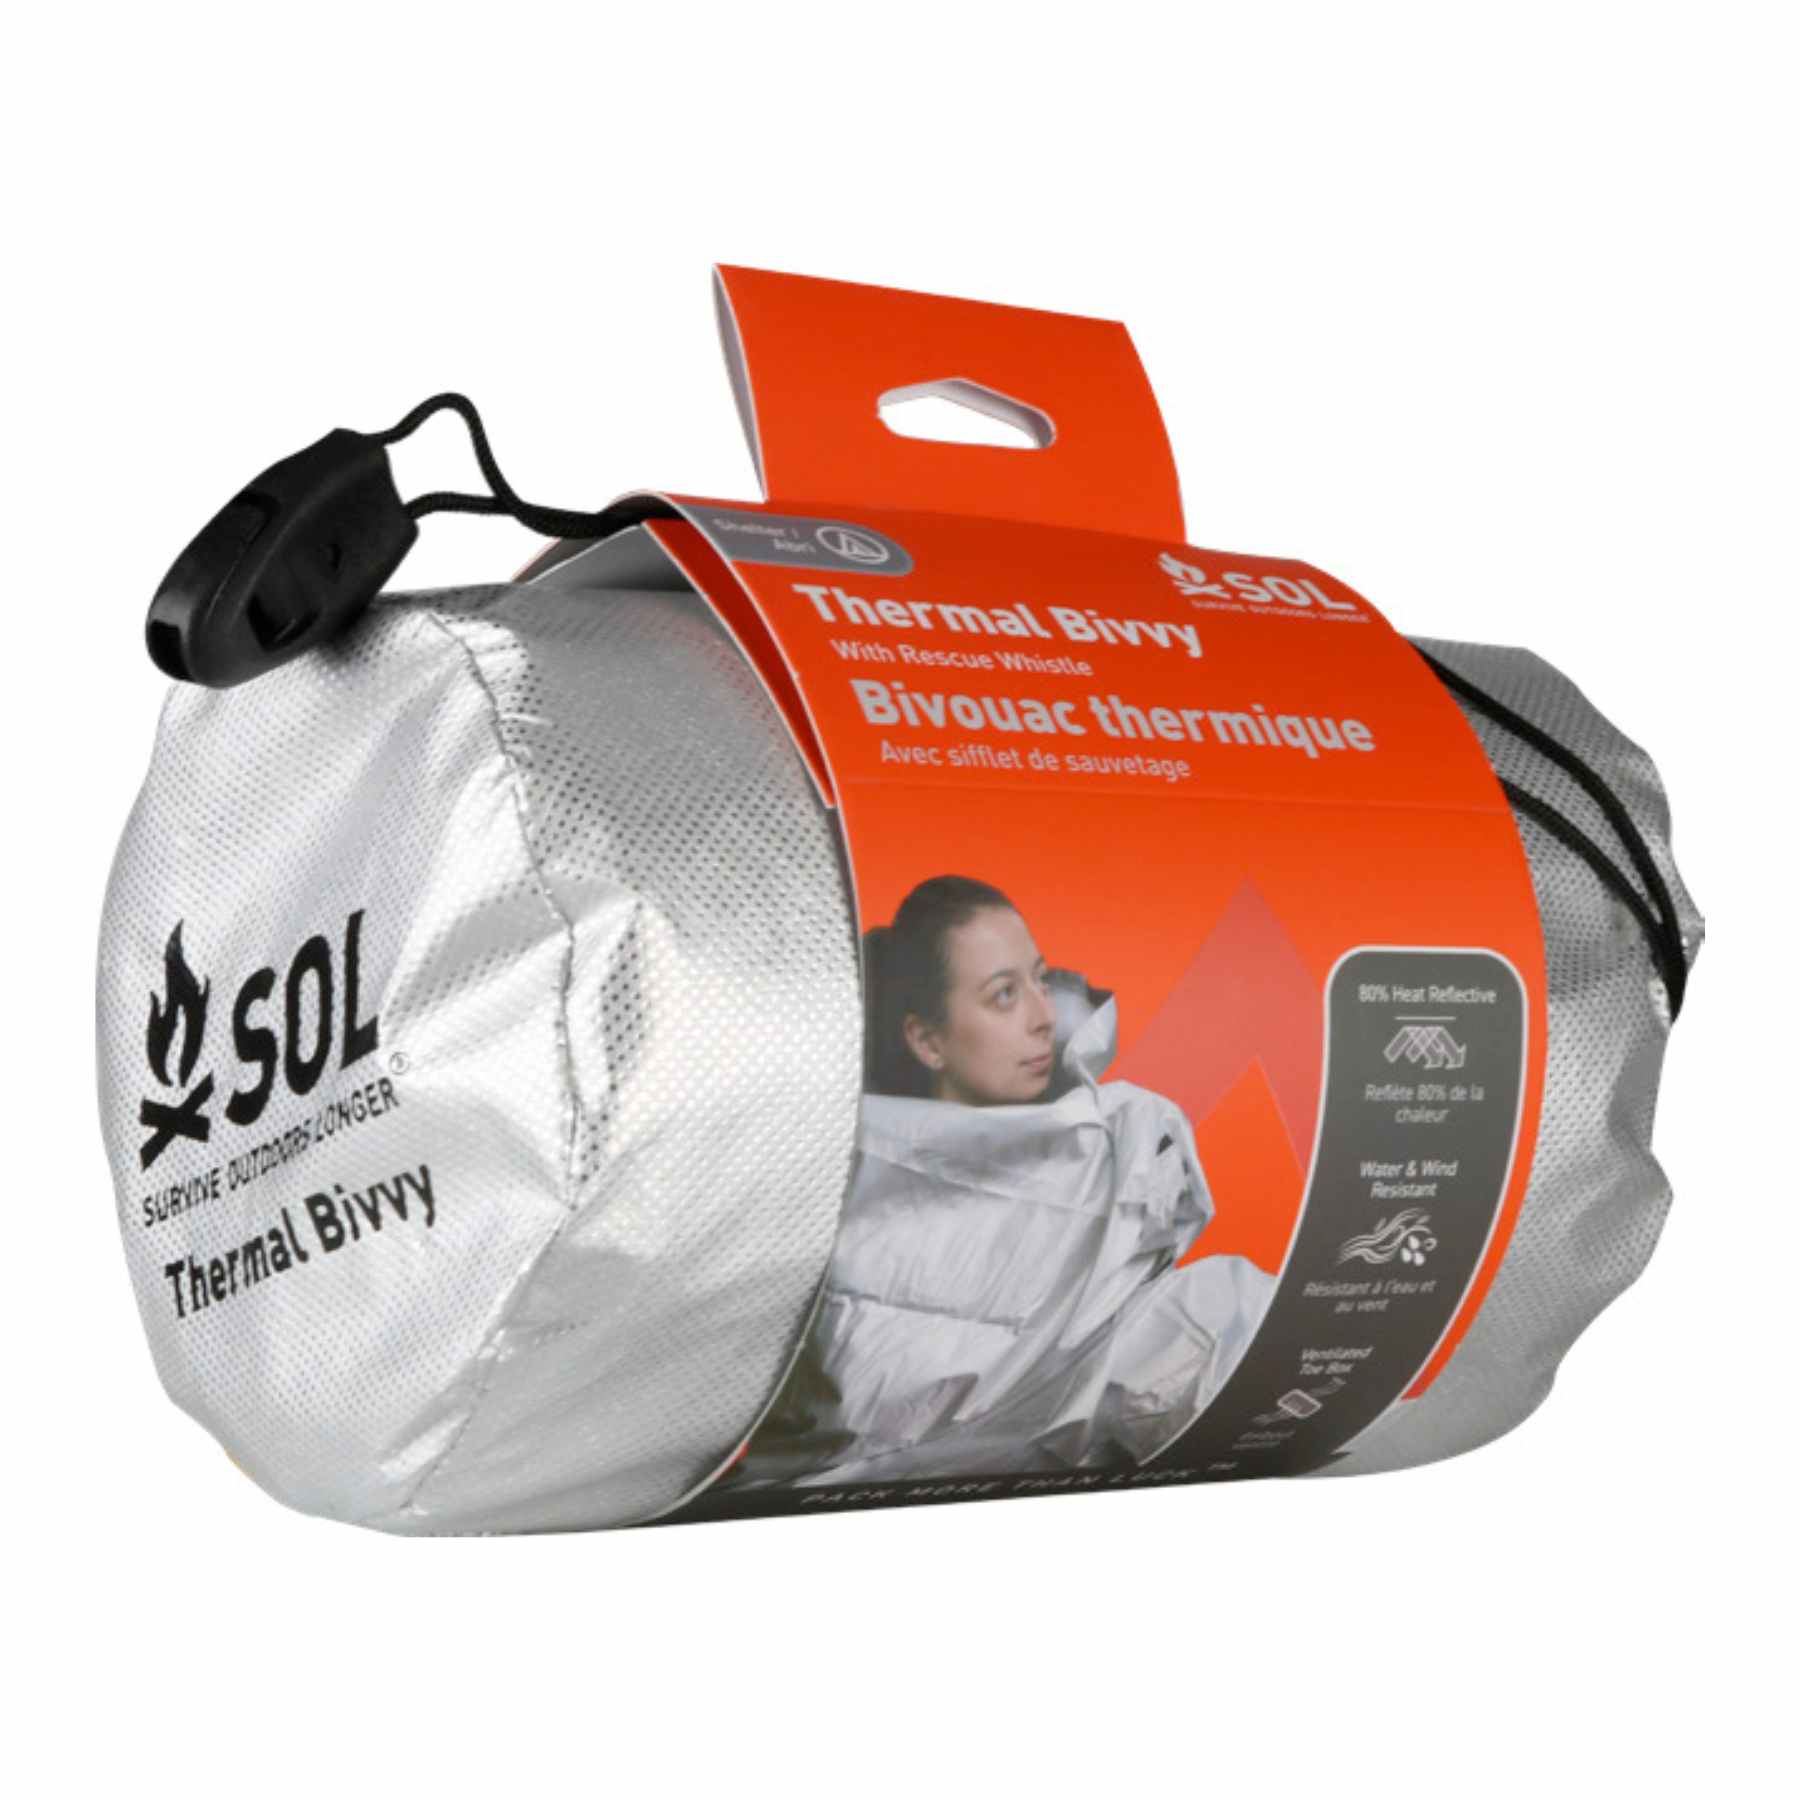 Thermal Bivvy with Rescue Whistle in packaging